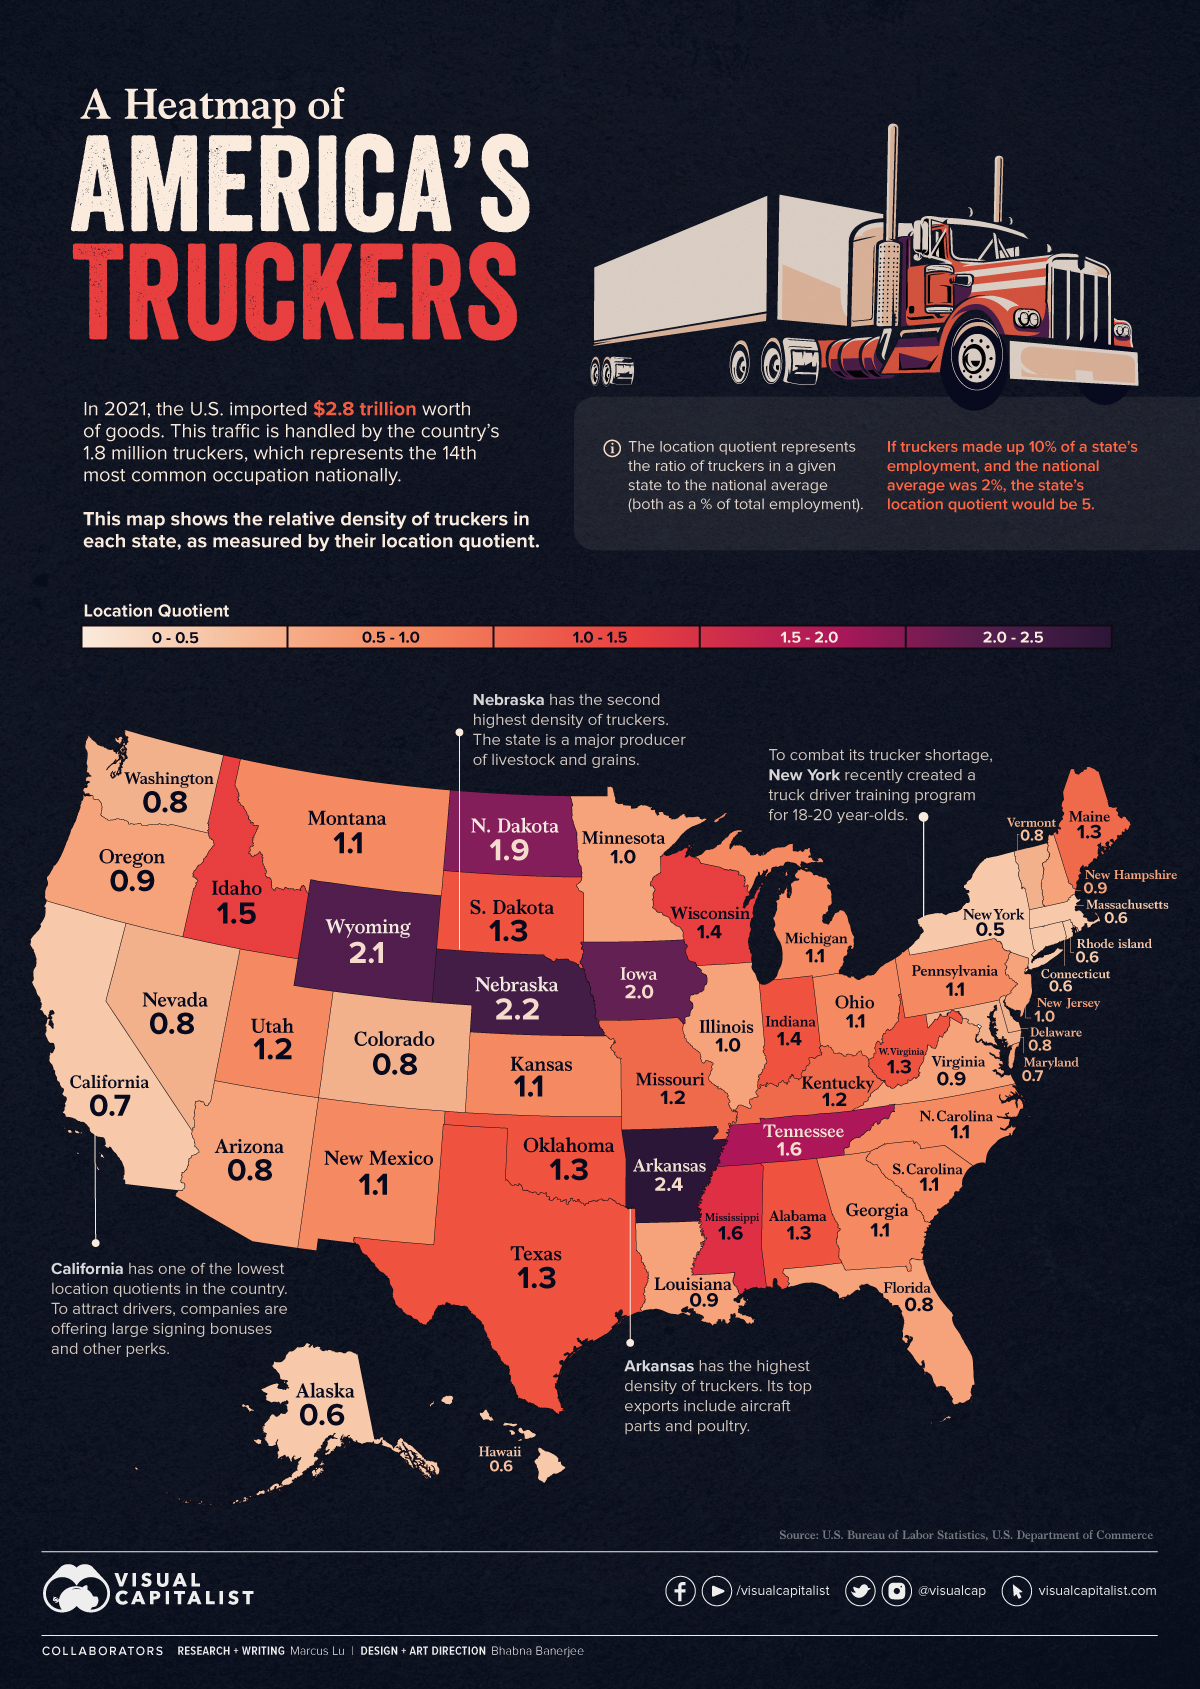 Mapped Where America's Truckers Live, by State